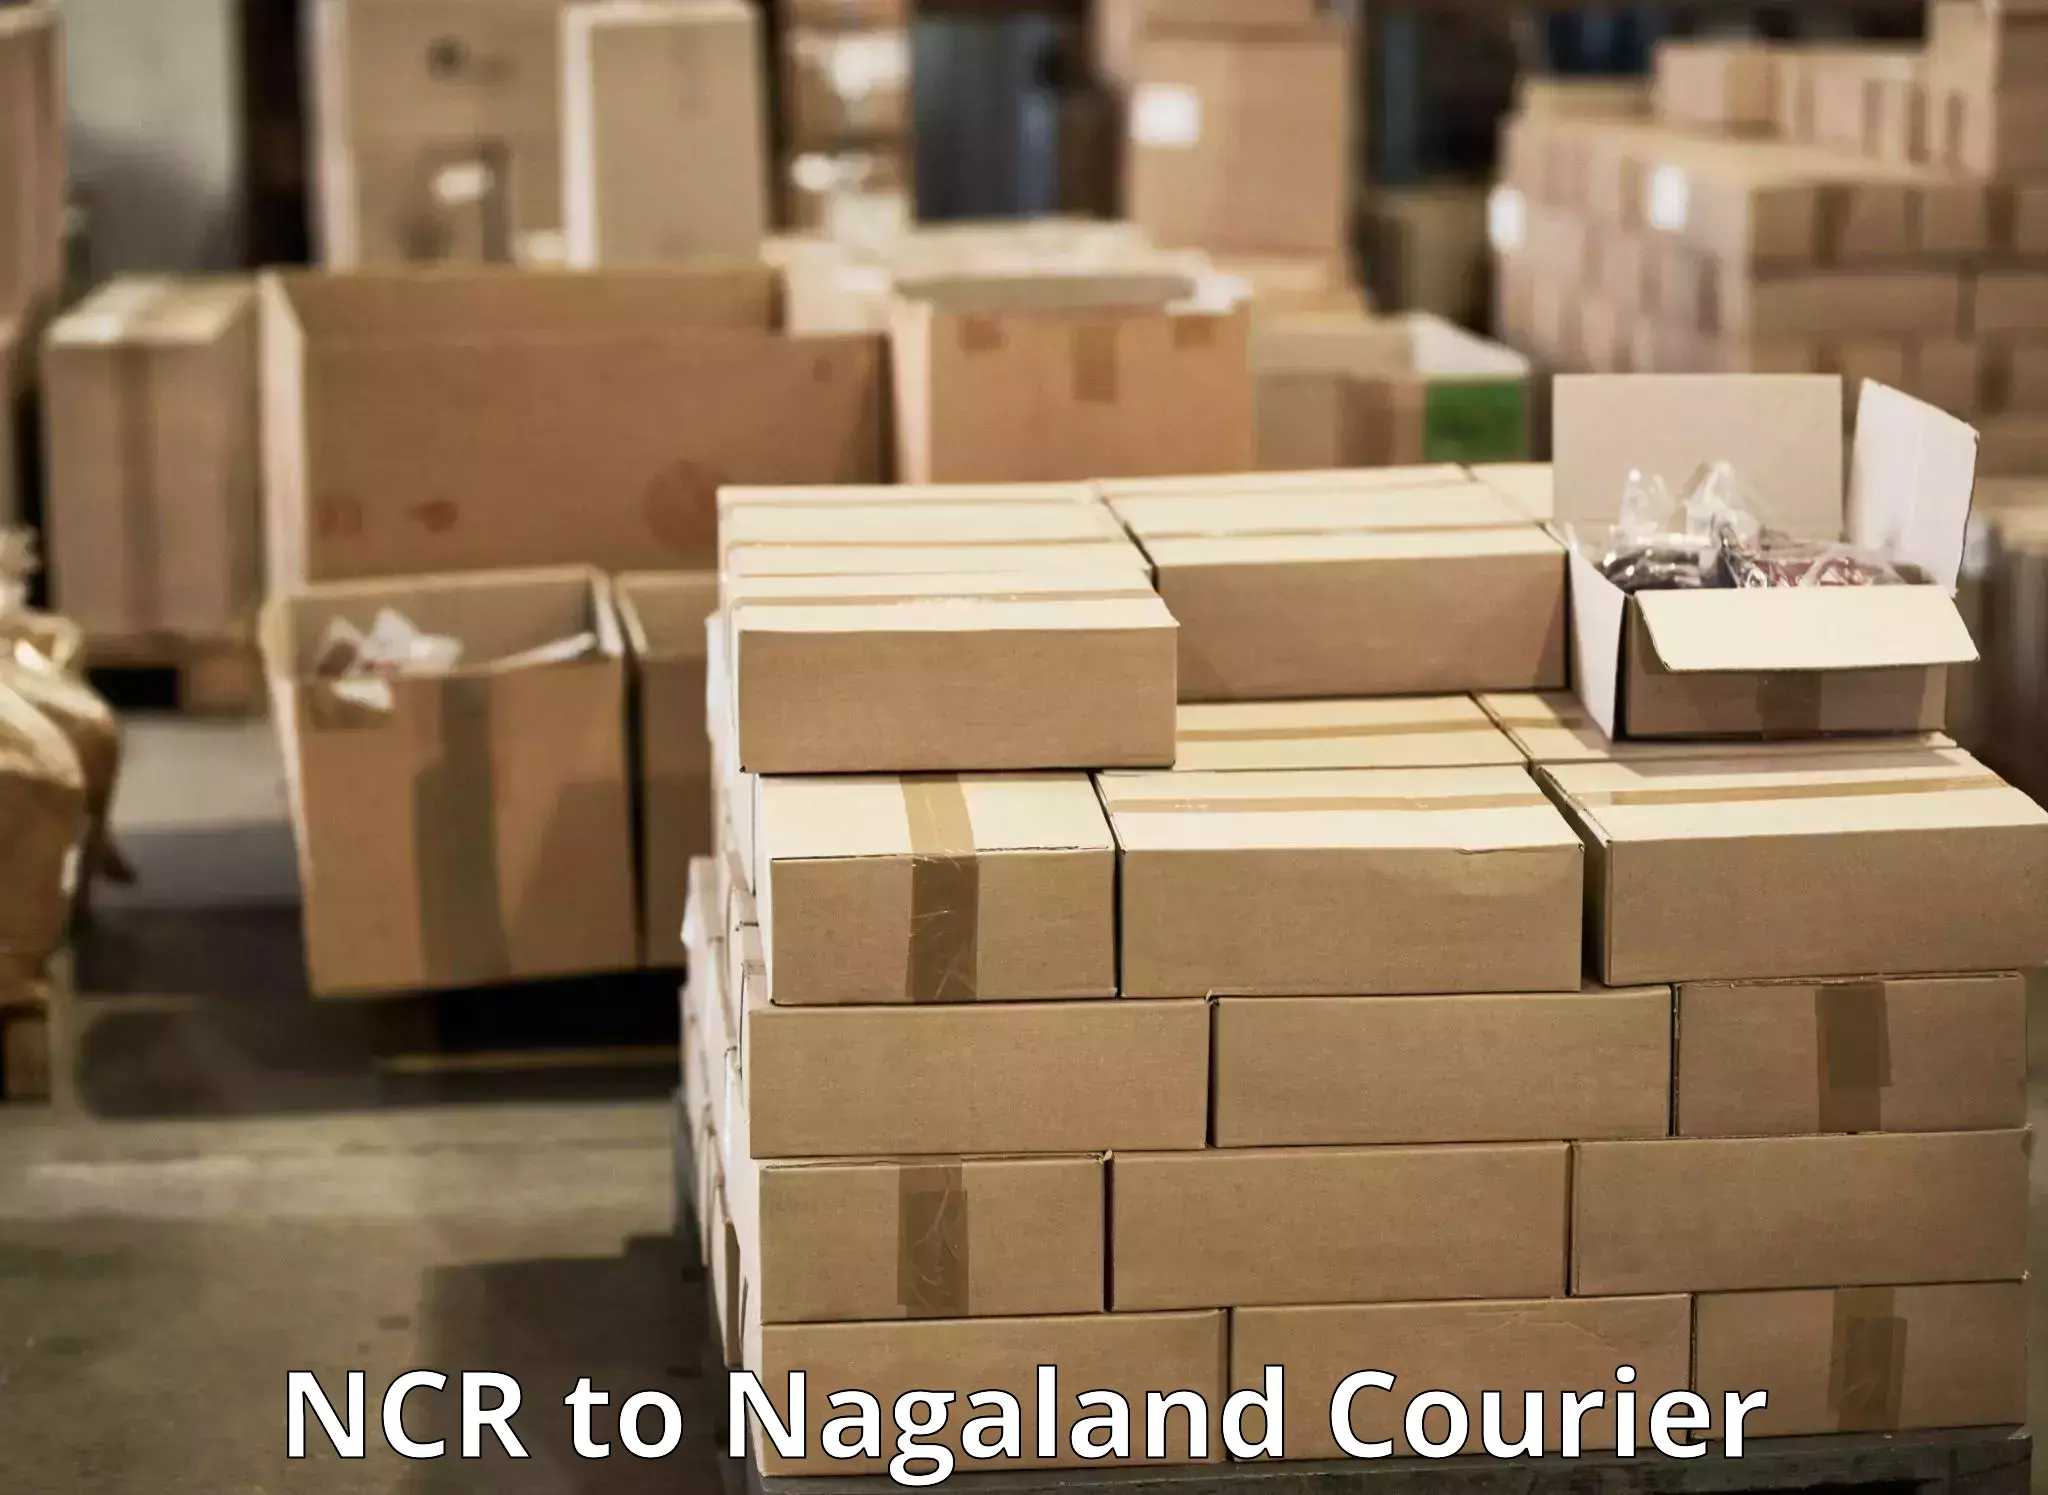 Cash on delivery service NCR to Zunheboto